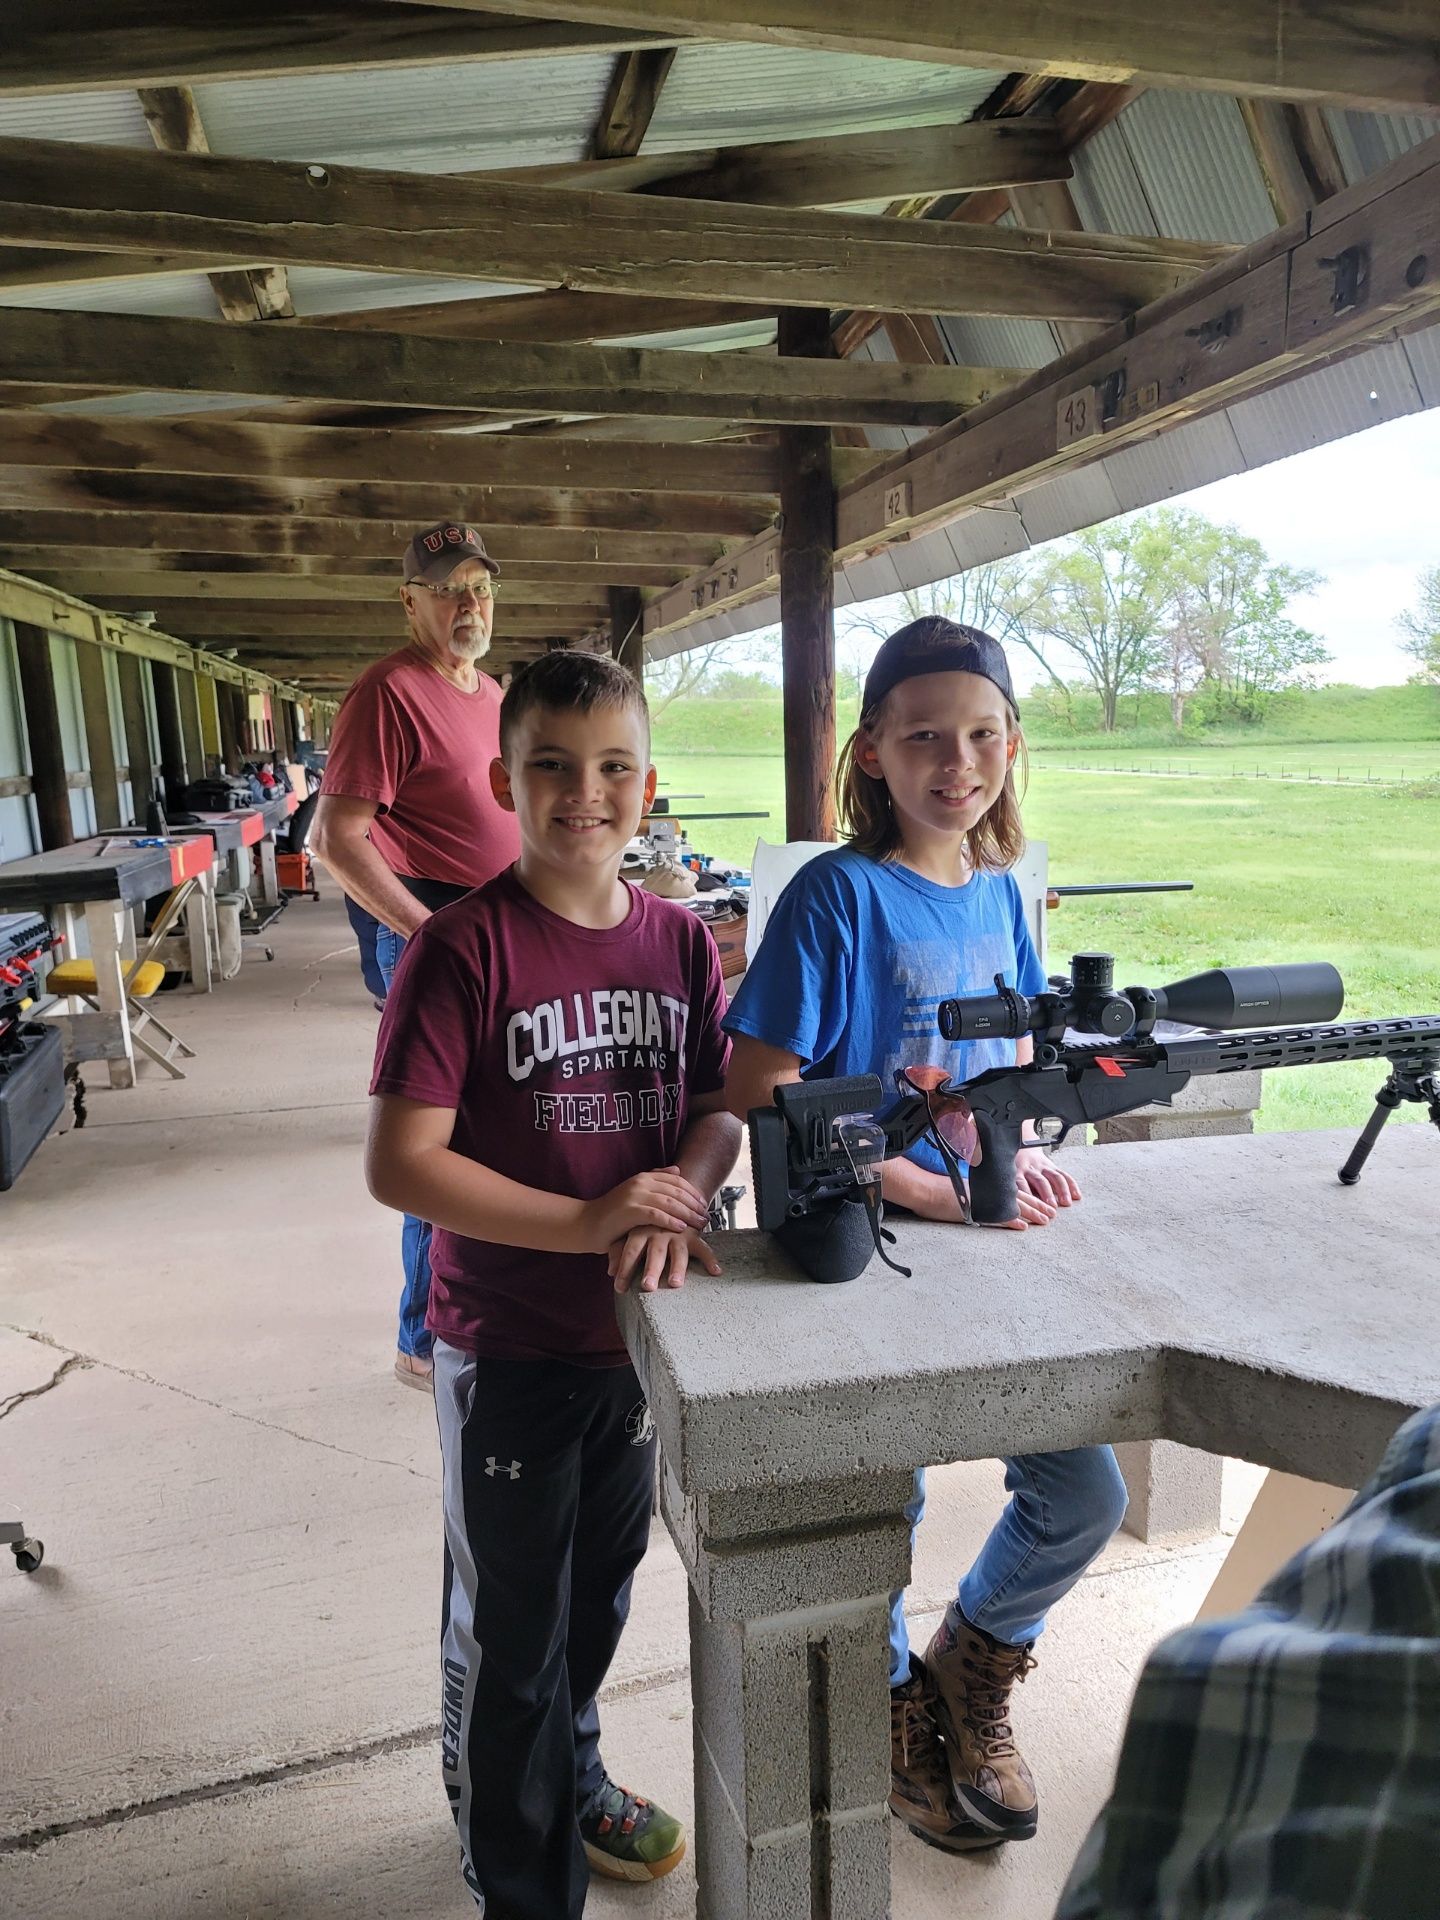 a boy and a girl smiling at the camera while standing by rifle at gun range